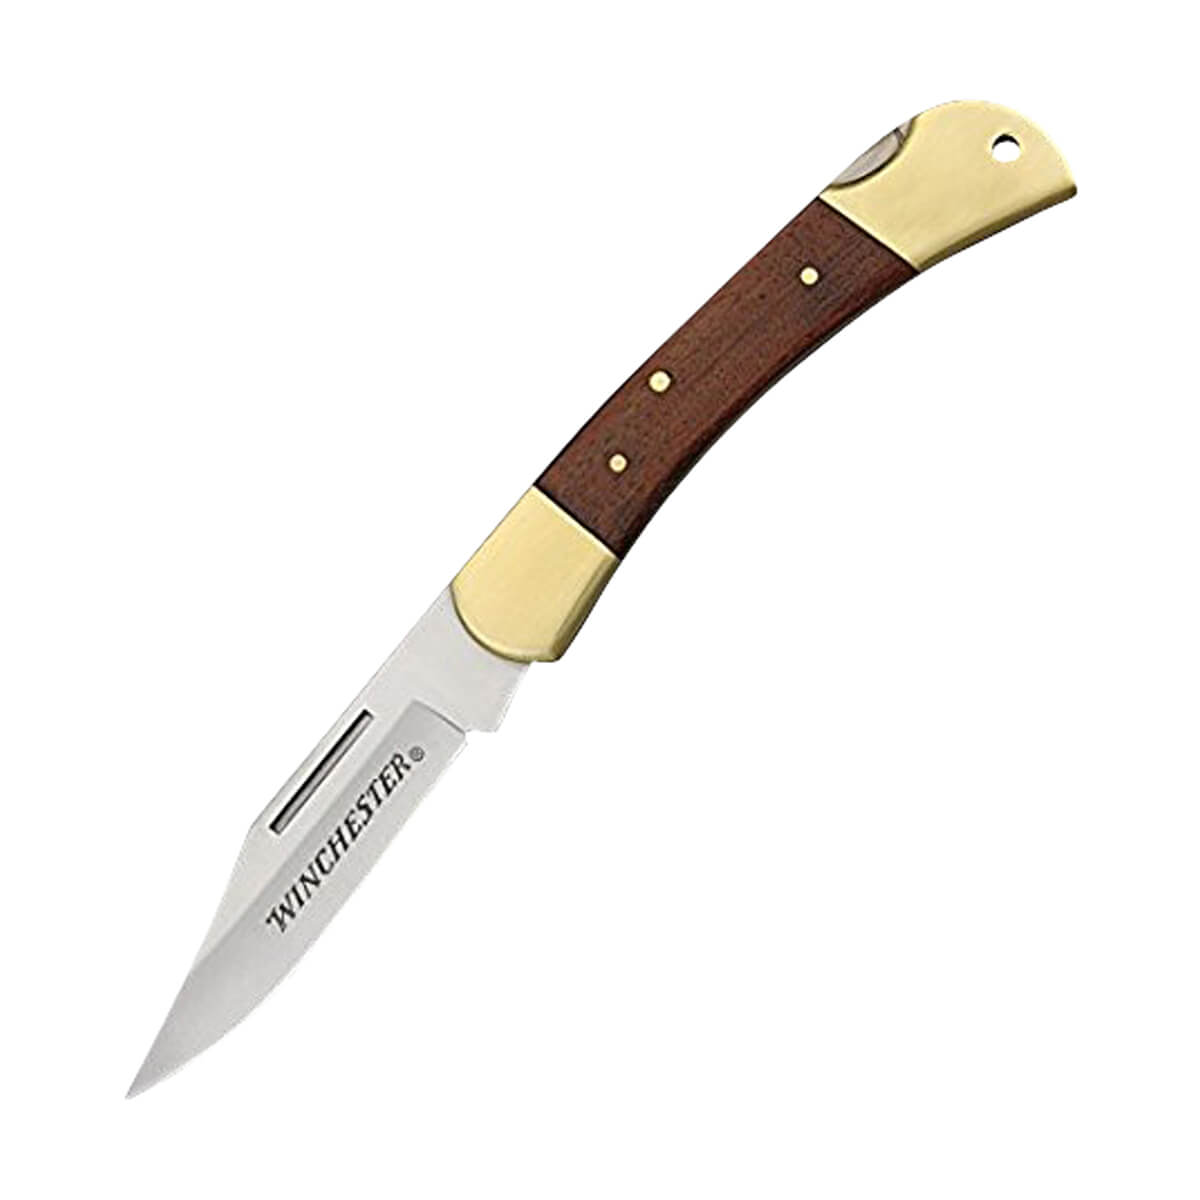 Winchester Brass Folding Knife with Leather Sheath - 3.5-in